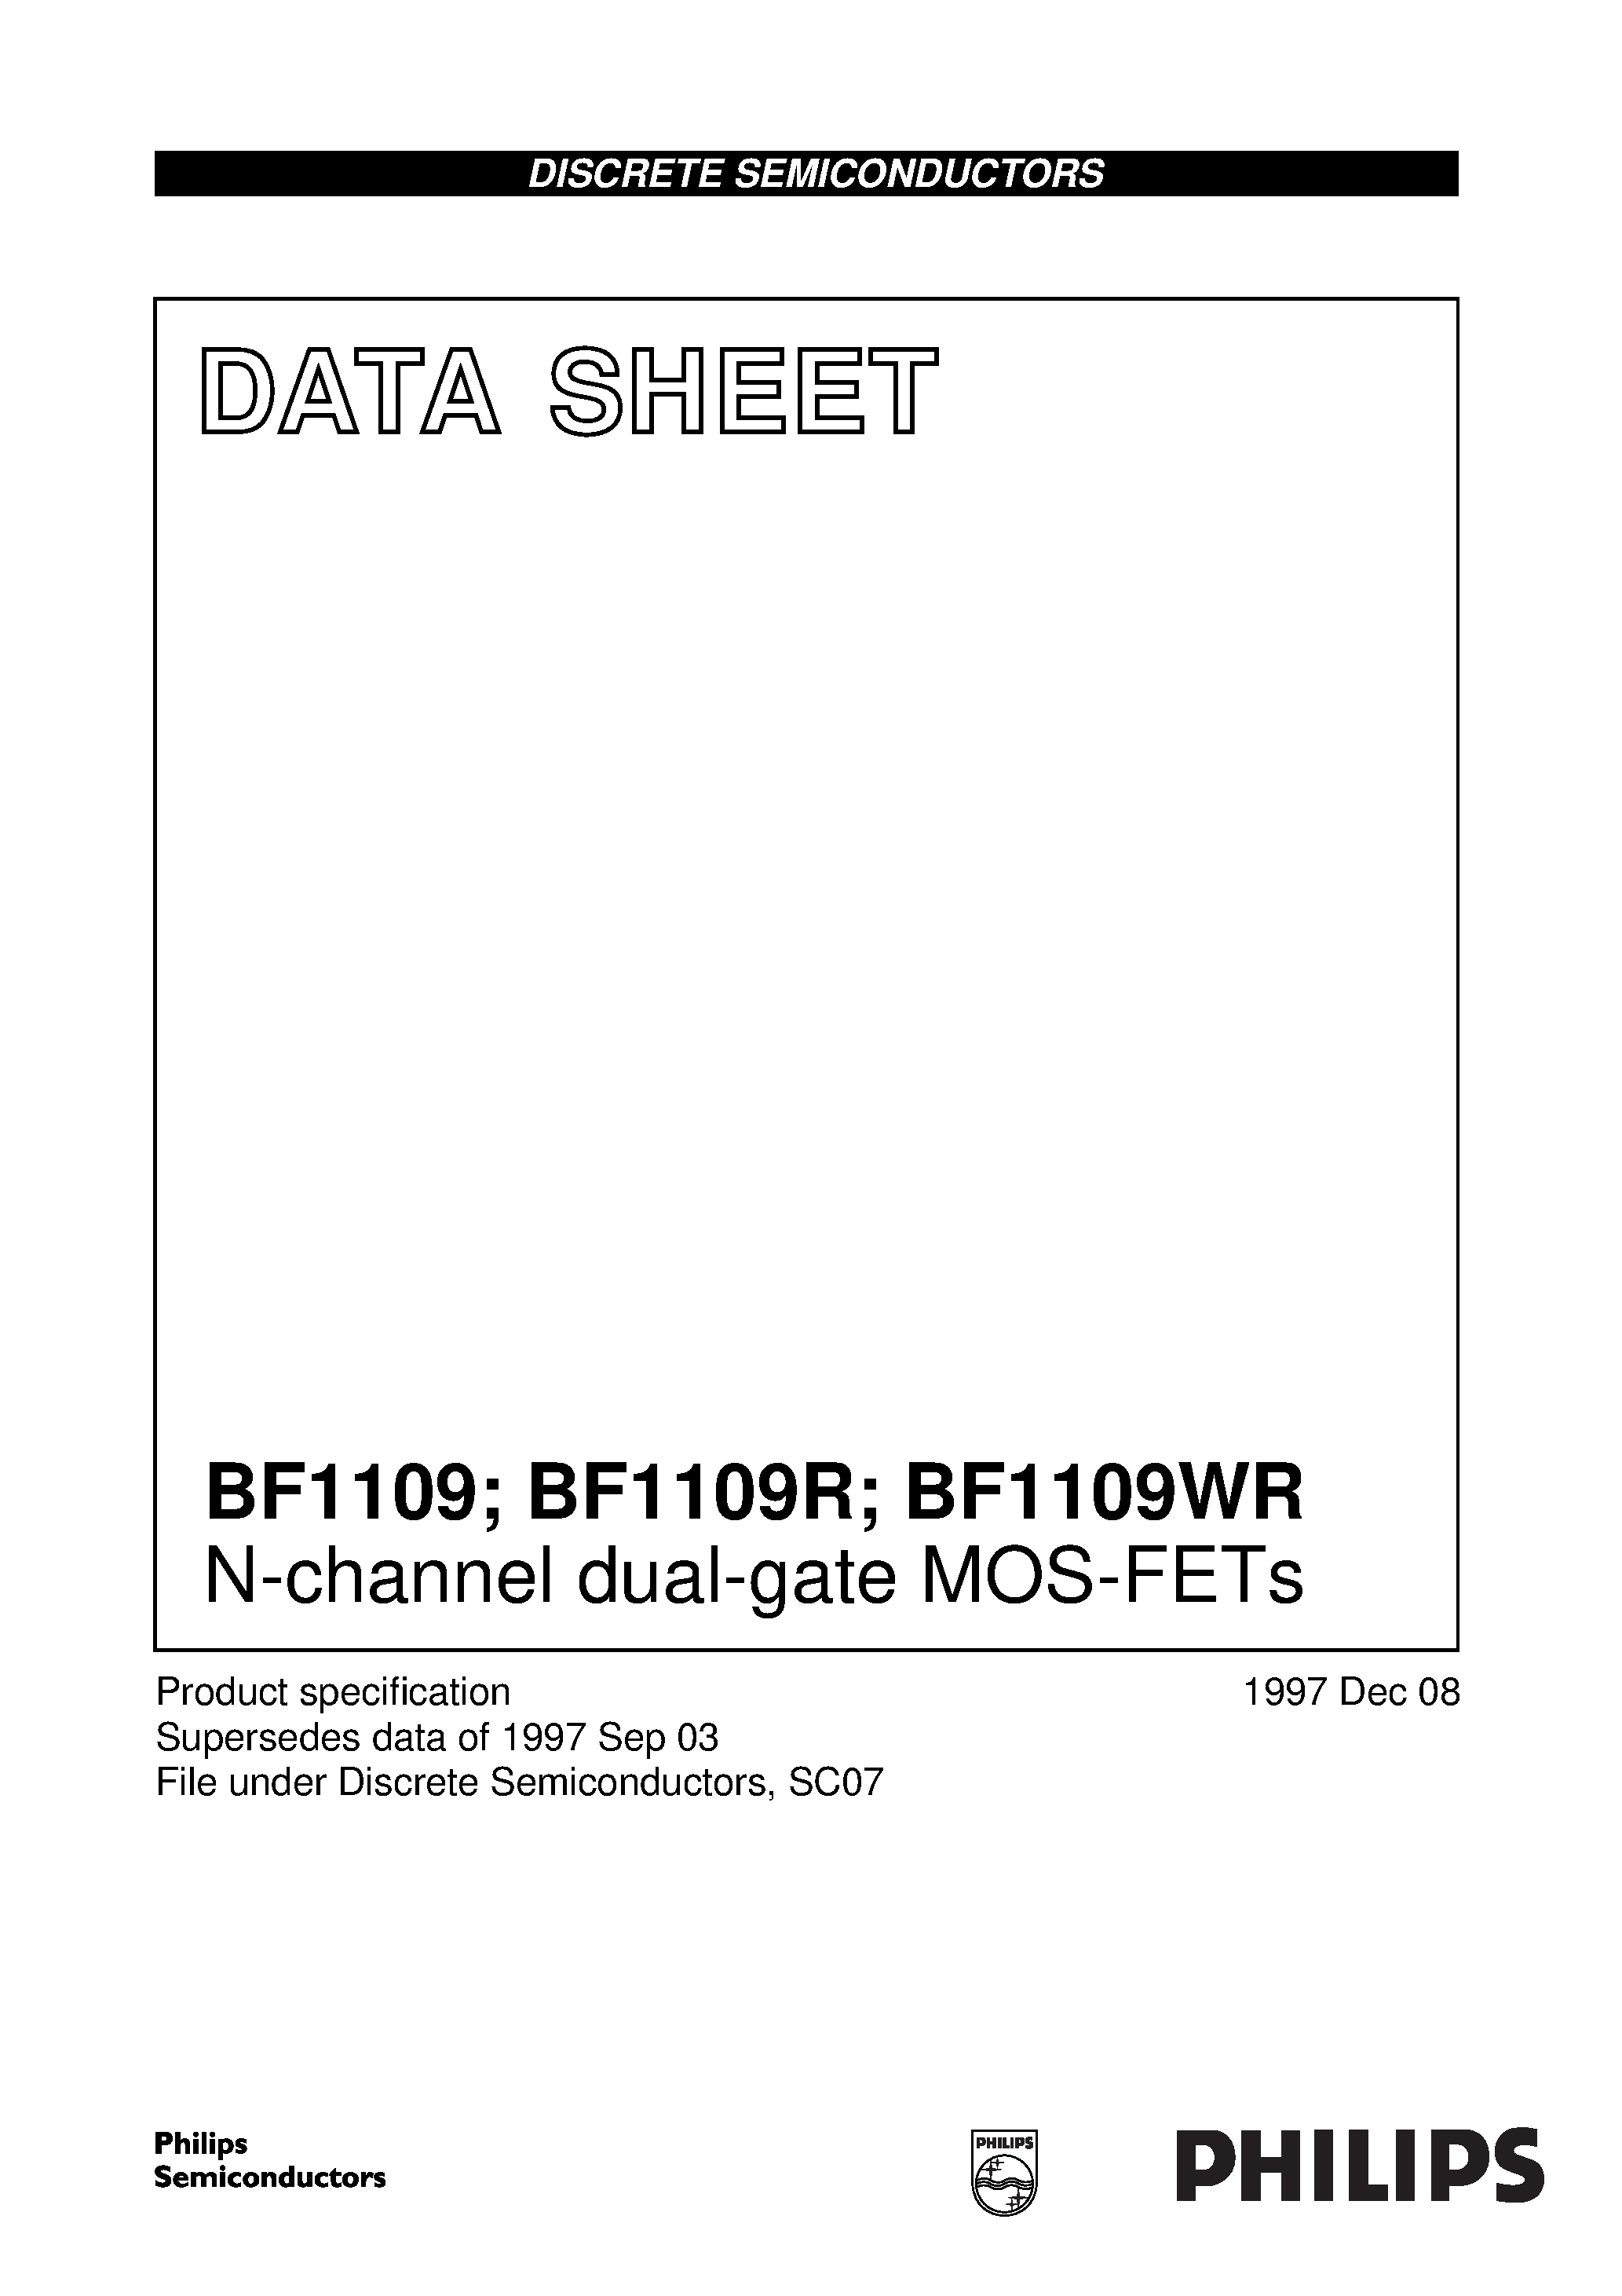 Datasheet BF1109R - N-channel dual-gate MOS-FETs page 1